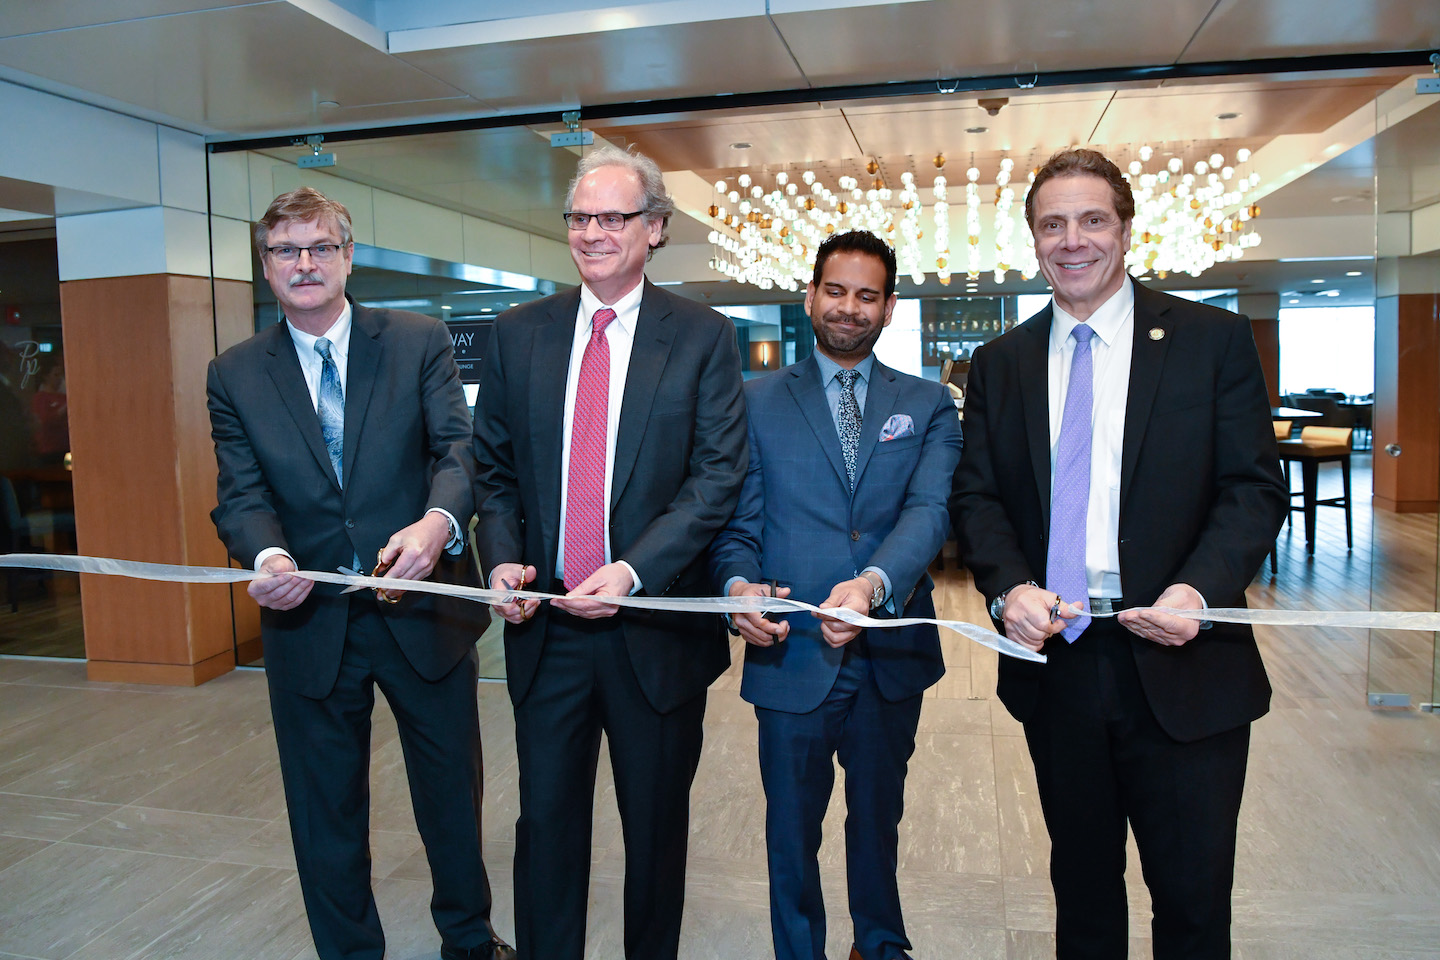 Gov. Andrew M. Cuomo celebrated the opening of the DoubleTree by Hilton in Niagara Falls and highlighted his proposal for additional economic development in Western New York. He is pictured, far right, with Niagara Falls Mayor Paul Dyster, Empire State Development President/CEO/Commissioner Howard Zemsky, and Merani Hotel Group President Faisal Merani (Photo courtesy of Gov. Cuomo's Flickr page)